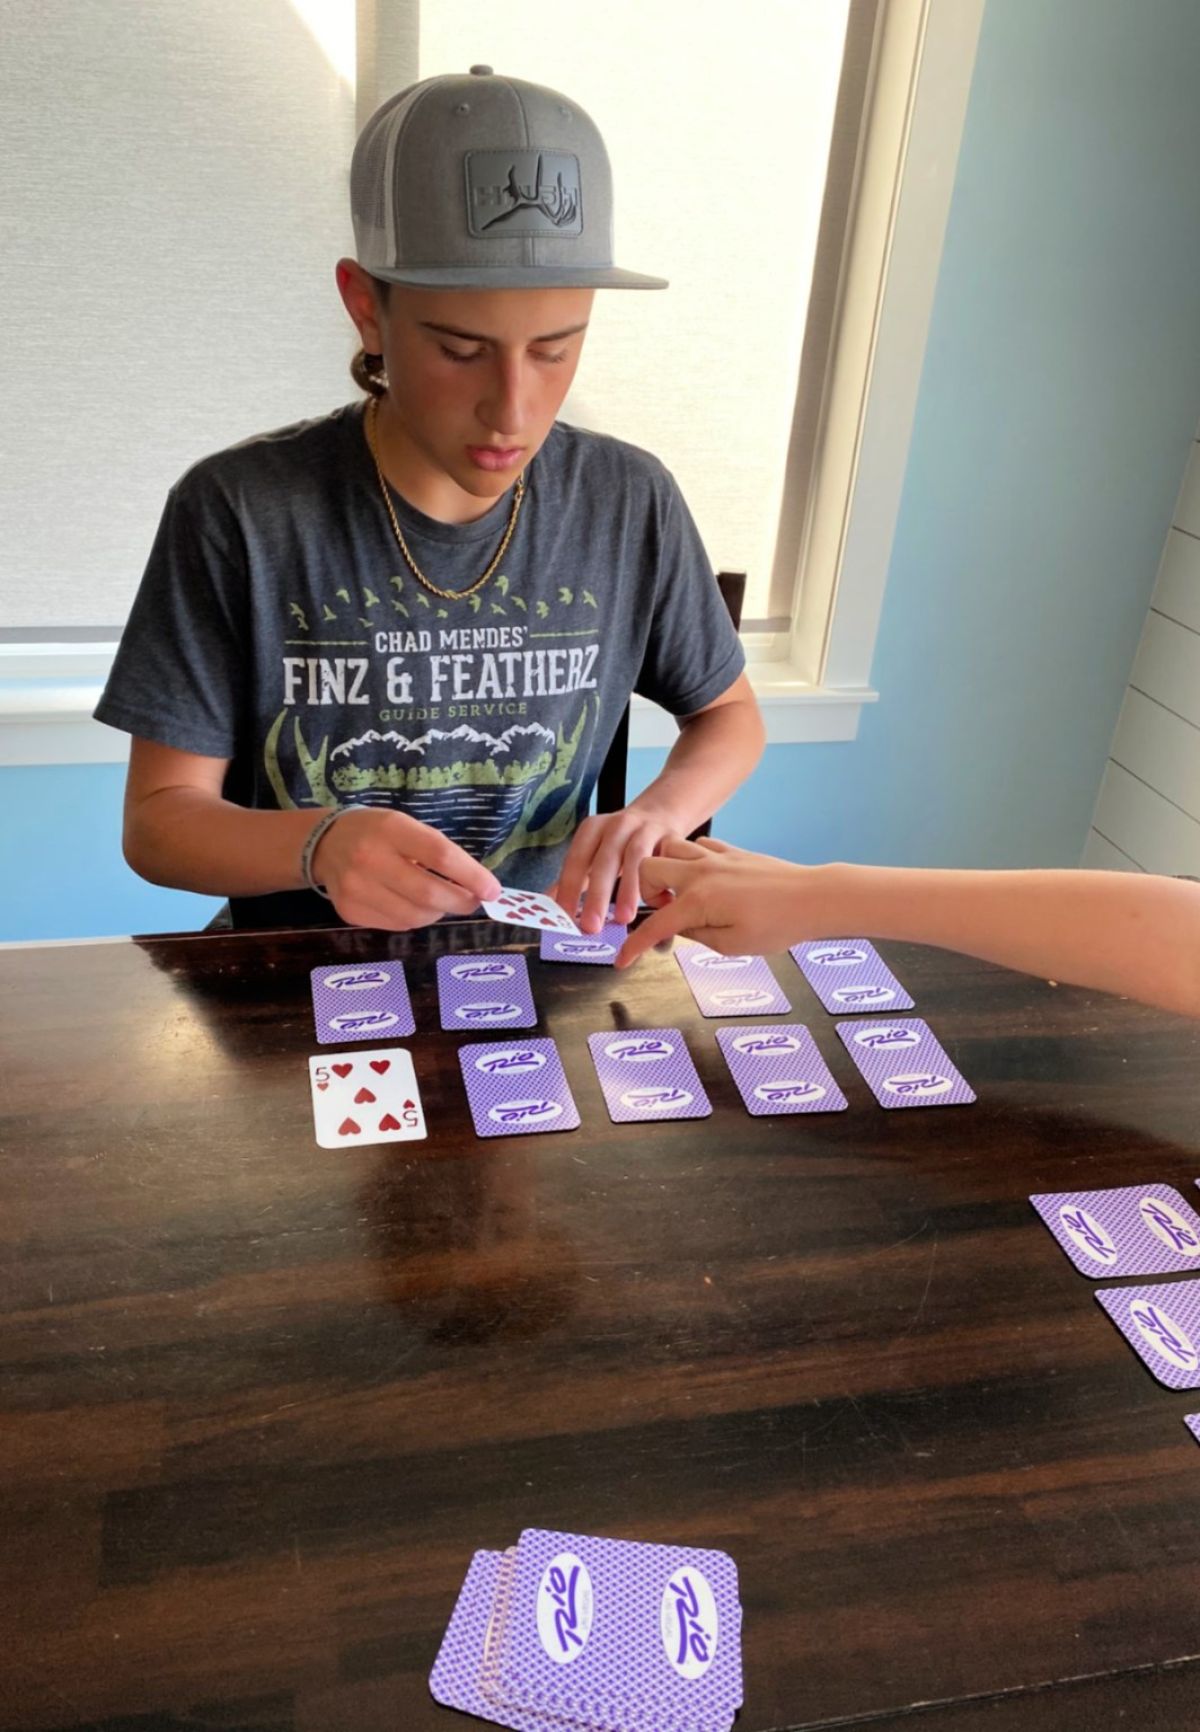 a boy sits at a dark wooden table and deals playing cards with purple backs